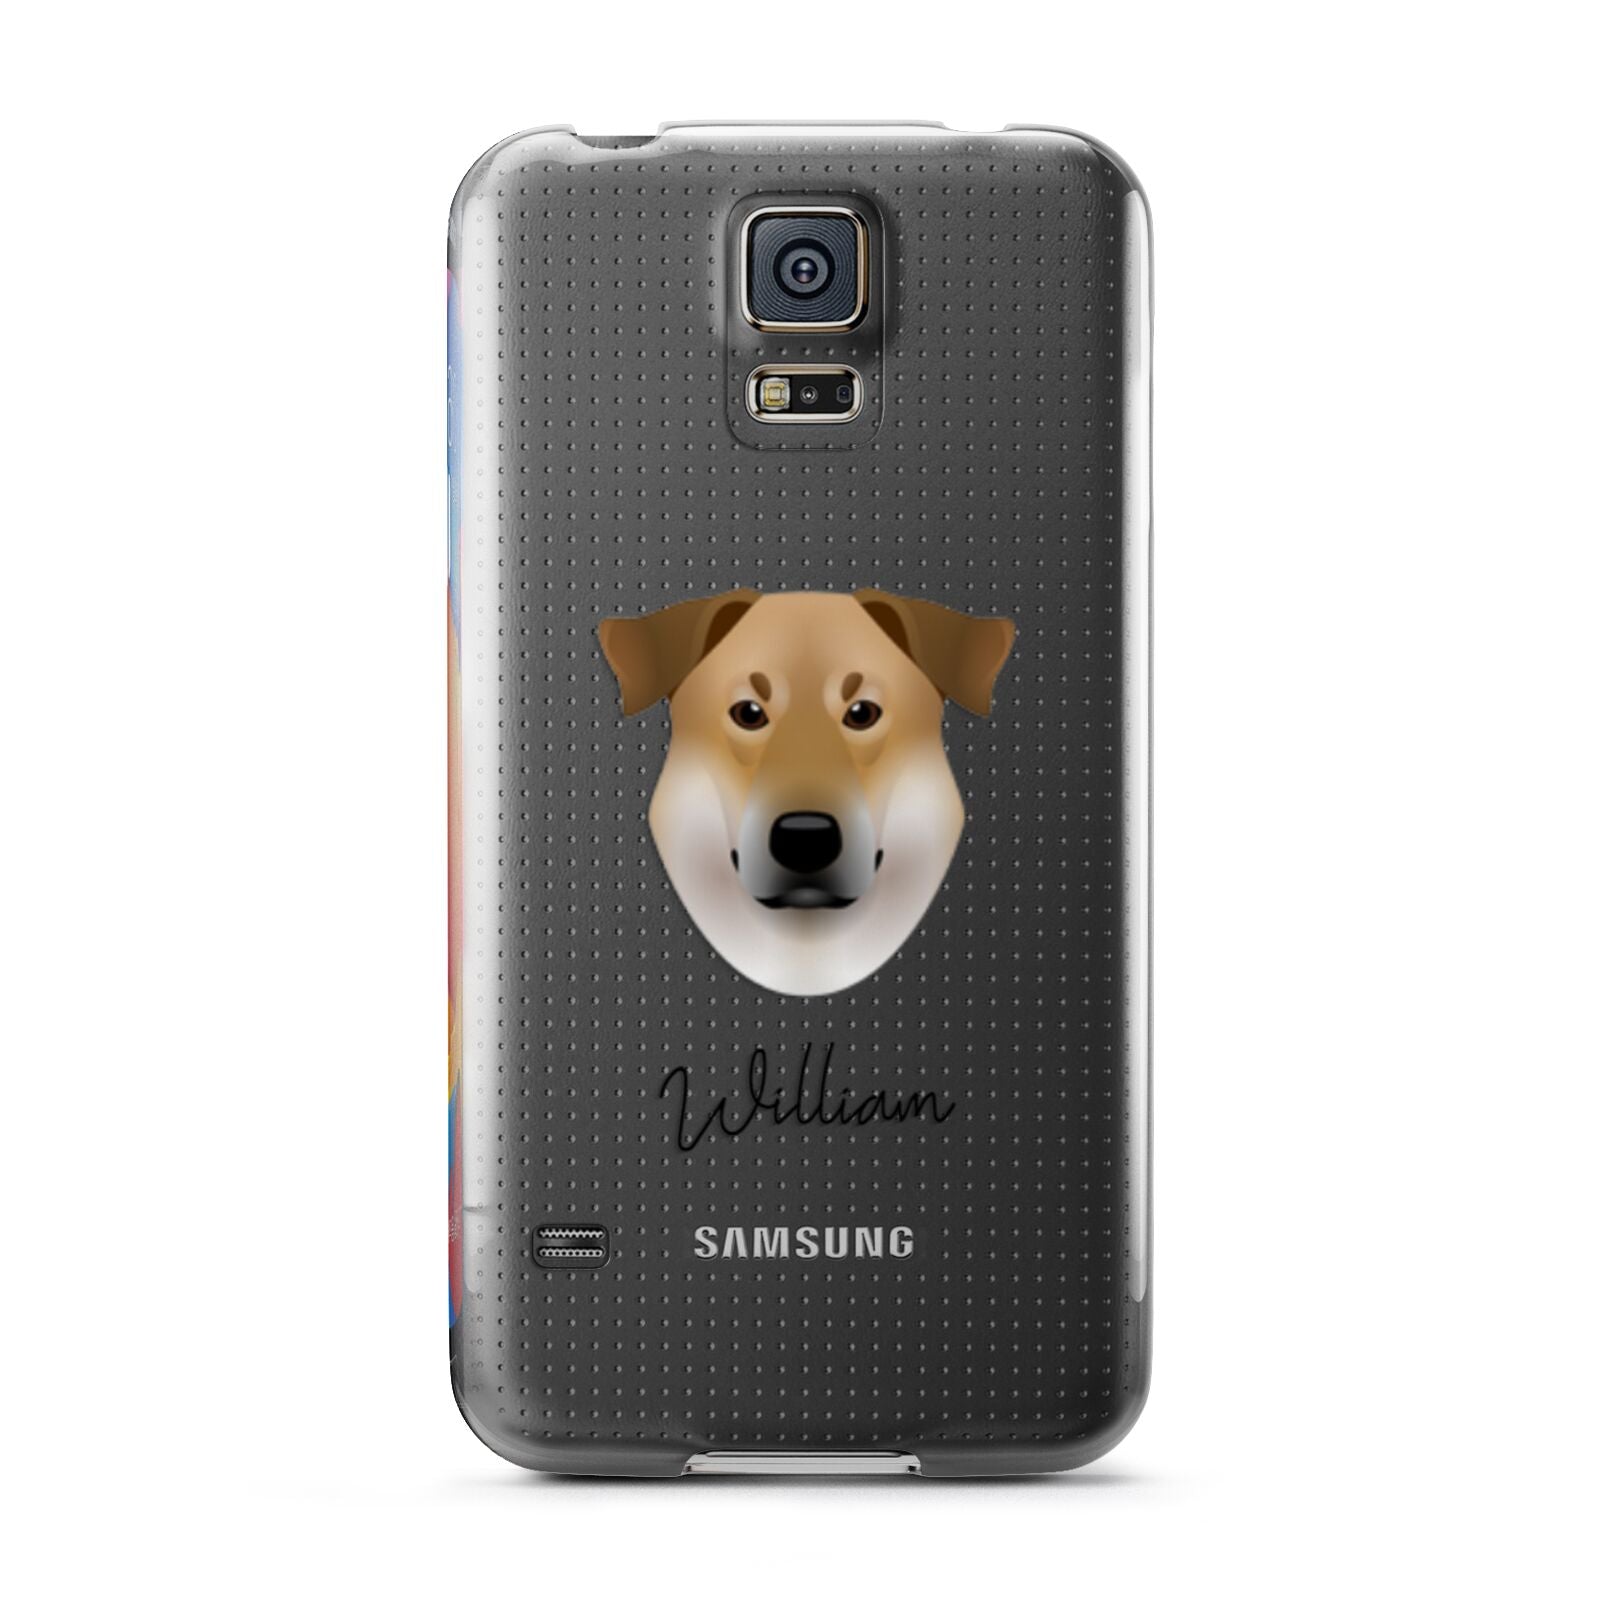 Chinook Personalised Samsung Galaxy S5 Case